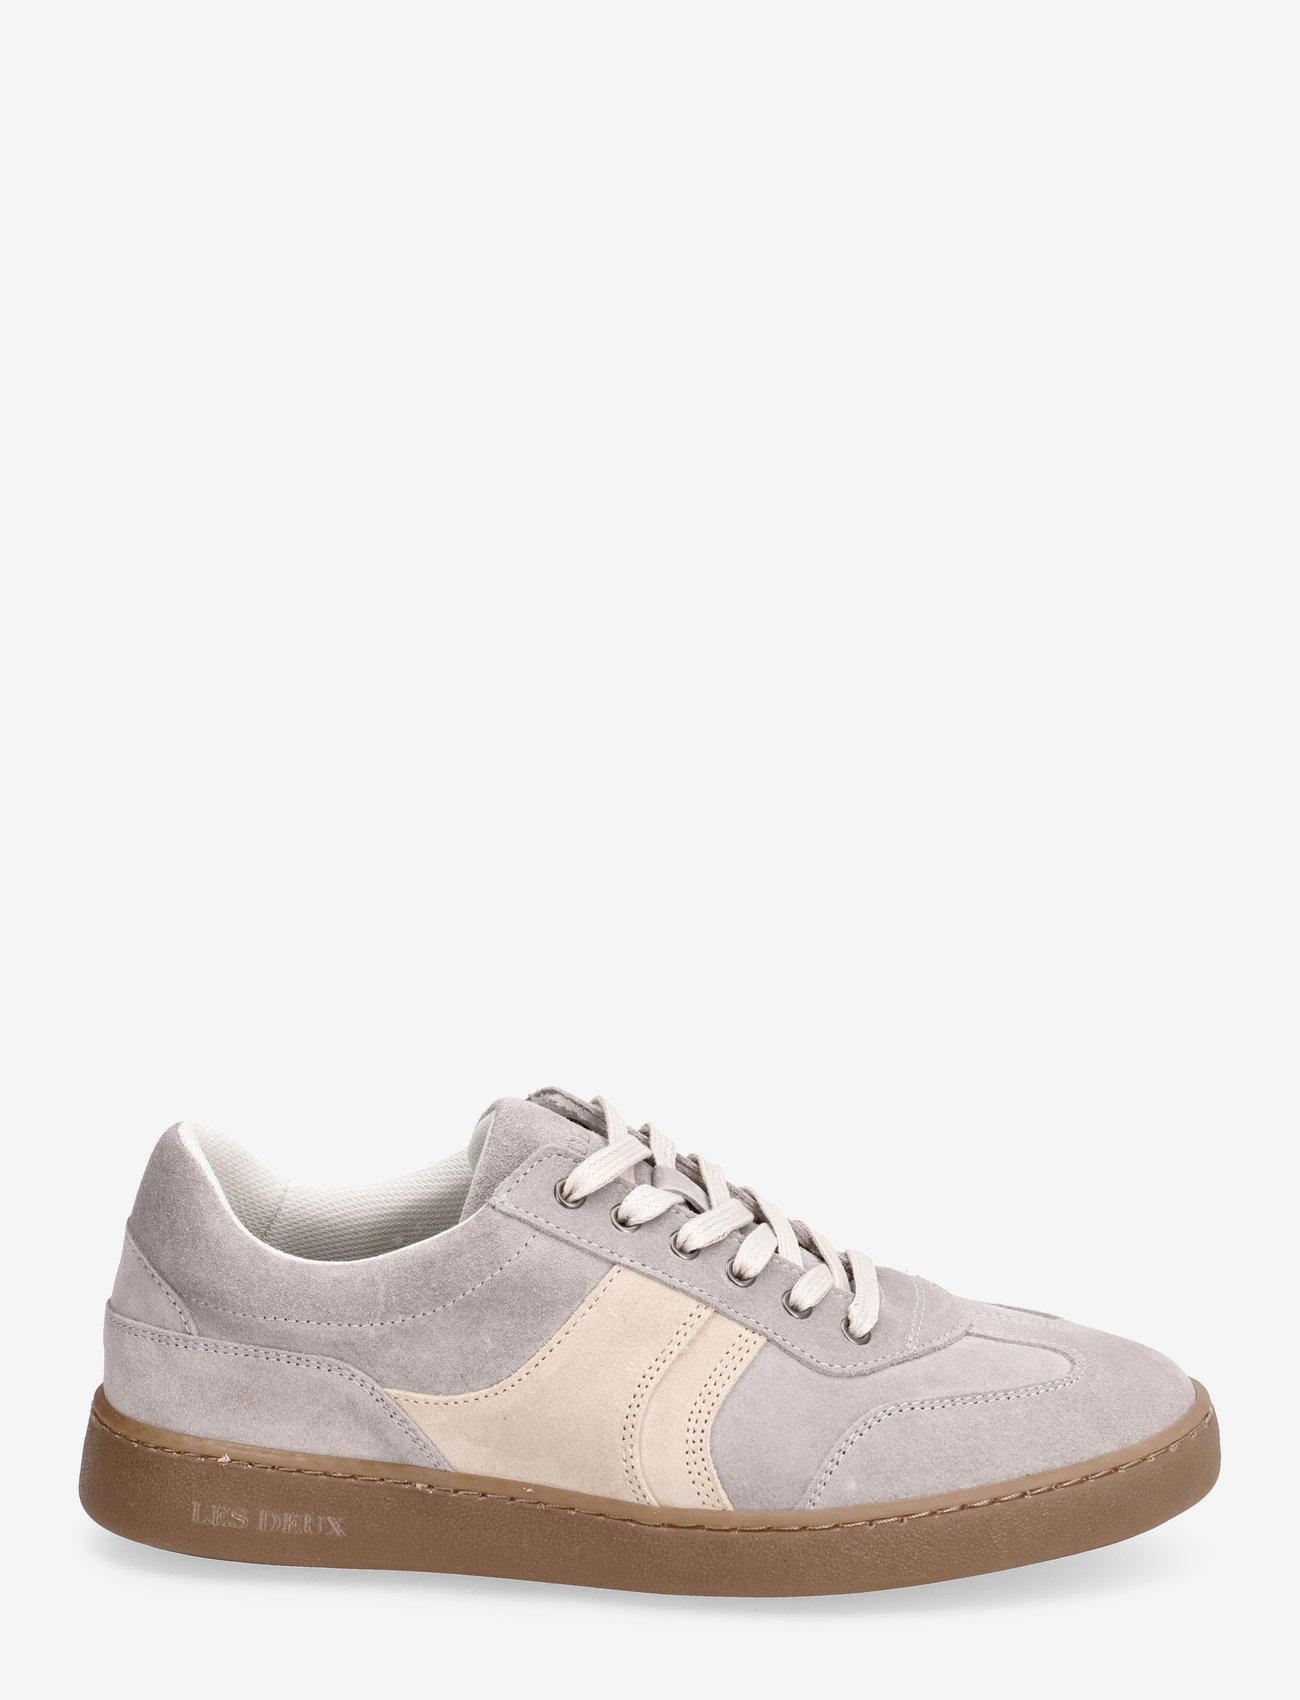 Les Deux - Walt Suede Army Trainer - low tops - light grey/ivory - 1